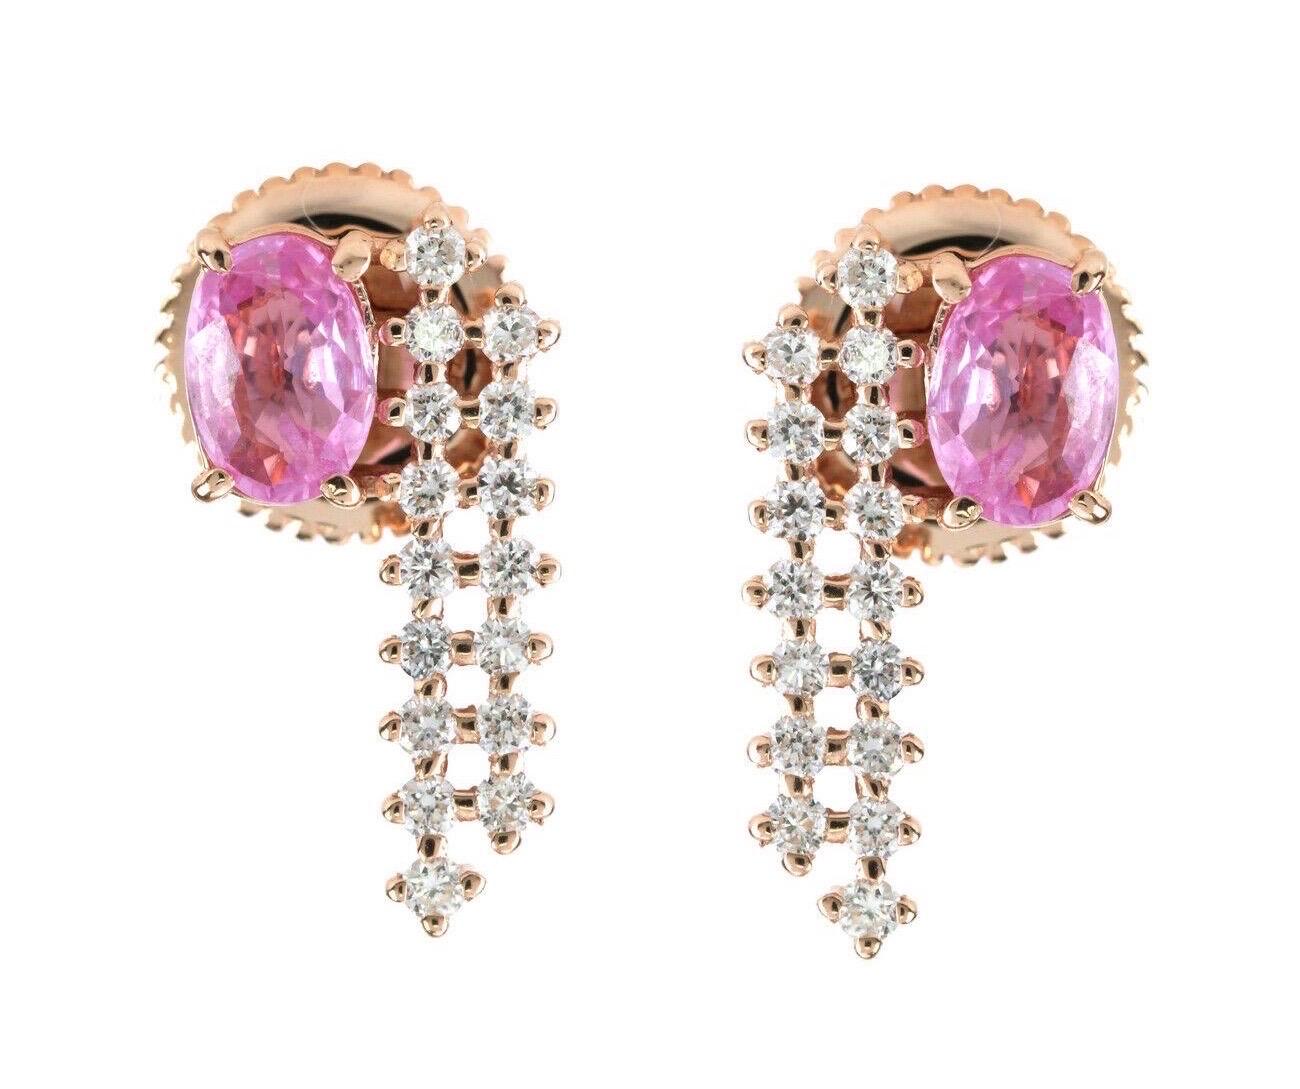 Cast from 18-karat gold, these beautiful earrings are hand set with .96 carats pink sapphire and .36 carats of sparkling diamonds. 

FOLLOW MEGHNA JEWELS storefront to view the latest collection & exclusive pieces. Meghna Jewels is proudly rated as